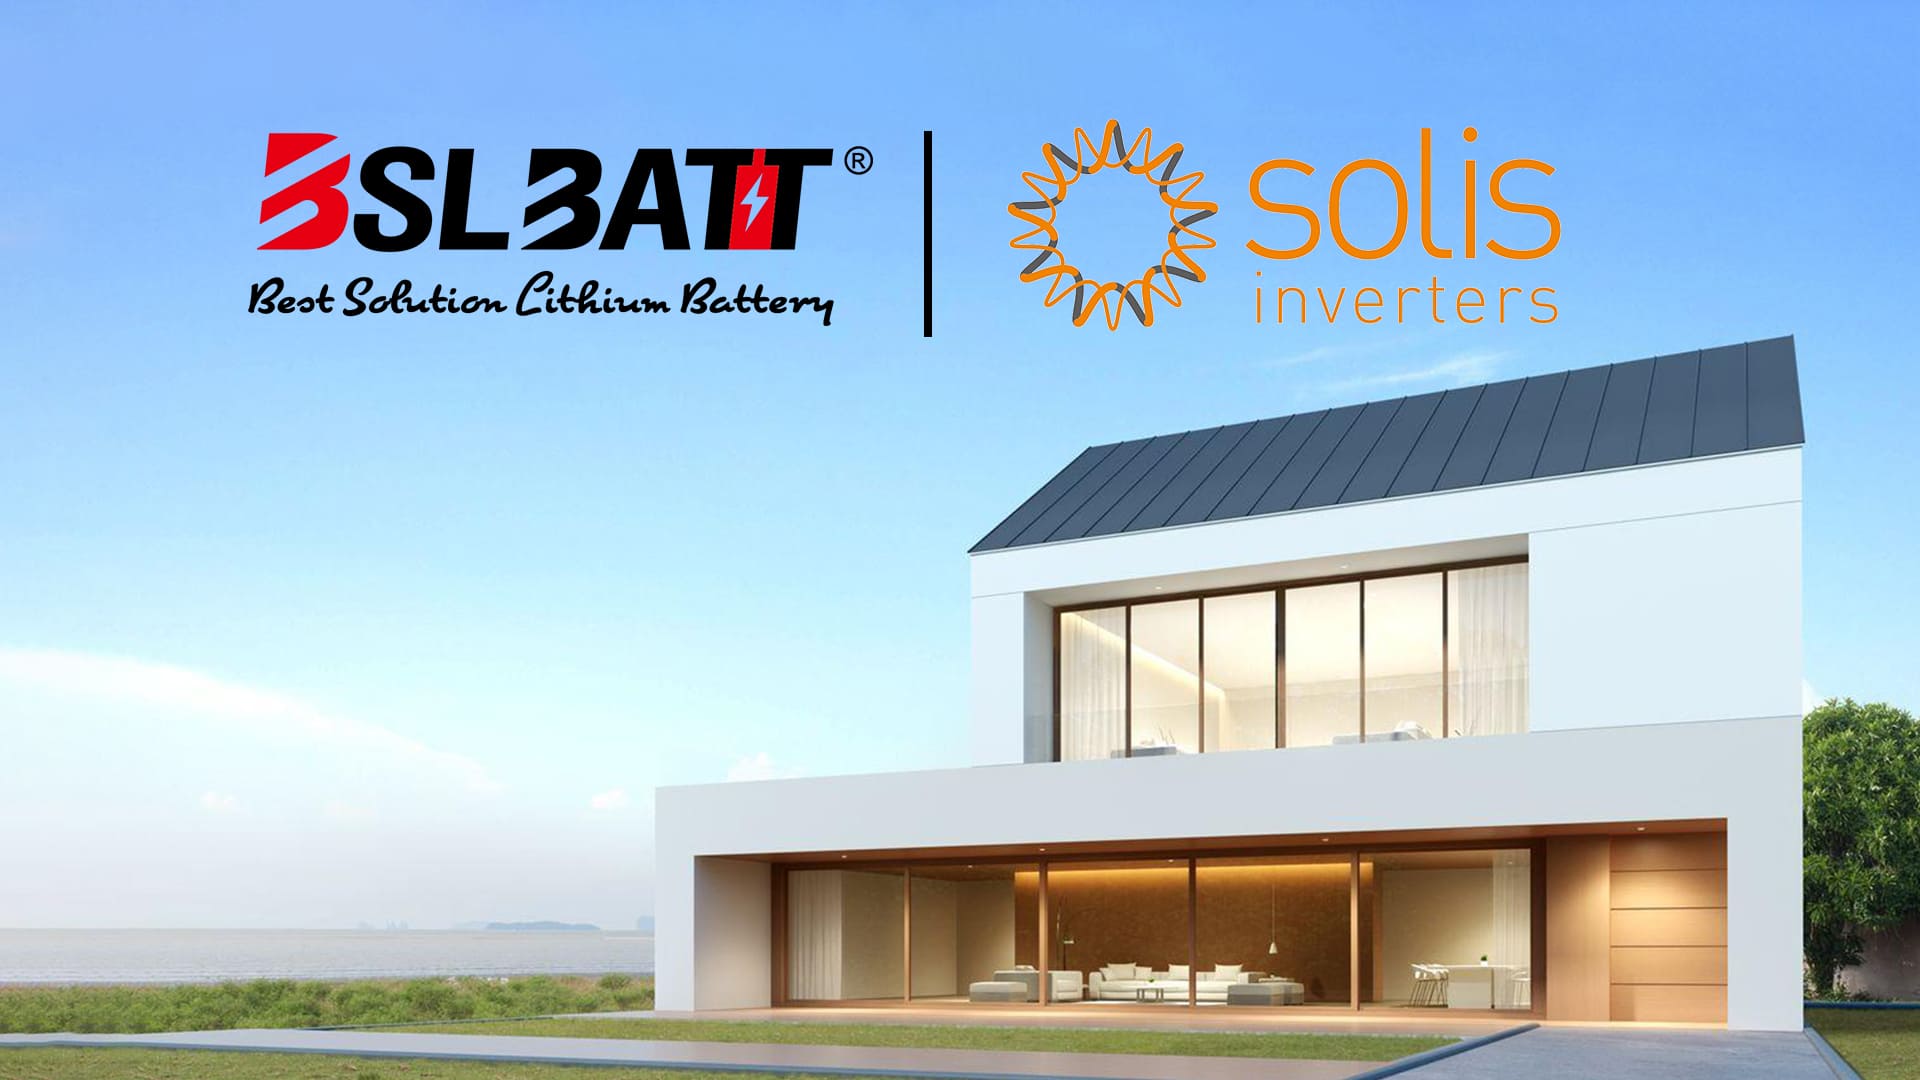 BSLBATT LiFePO4 Batteries Can be Integrated with Solis Inverters Now